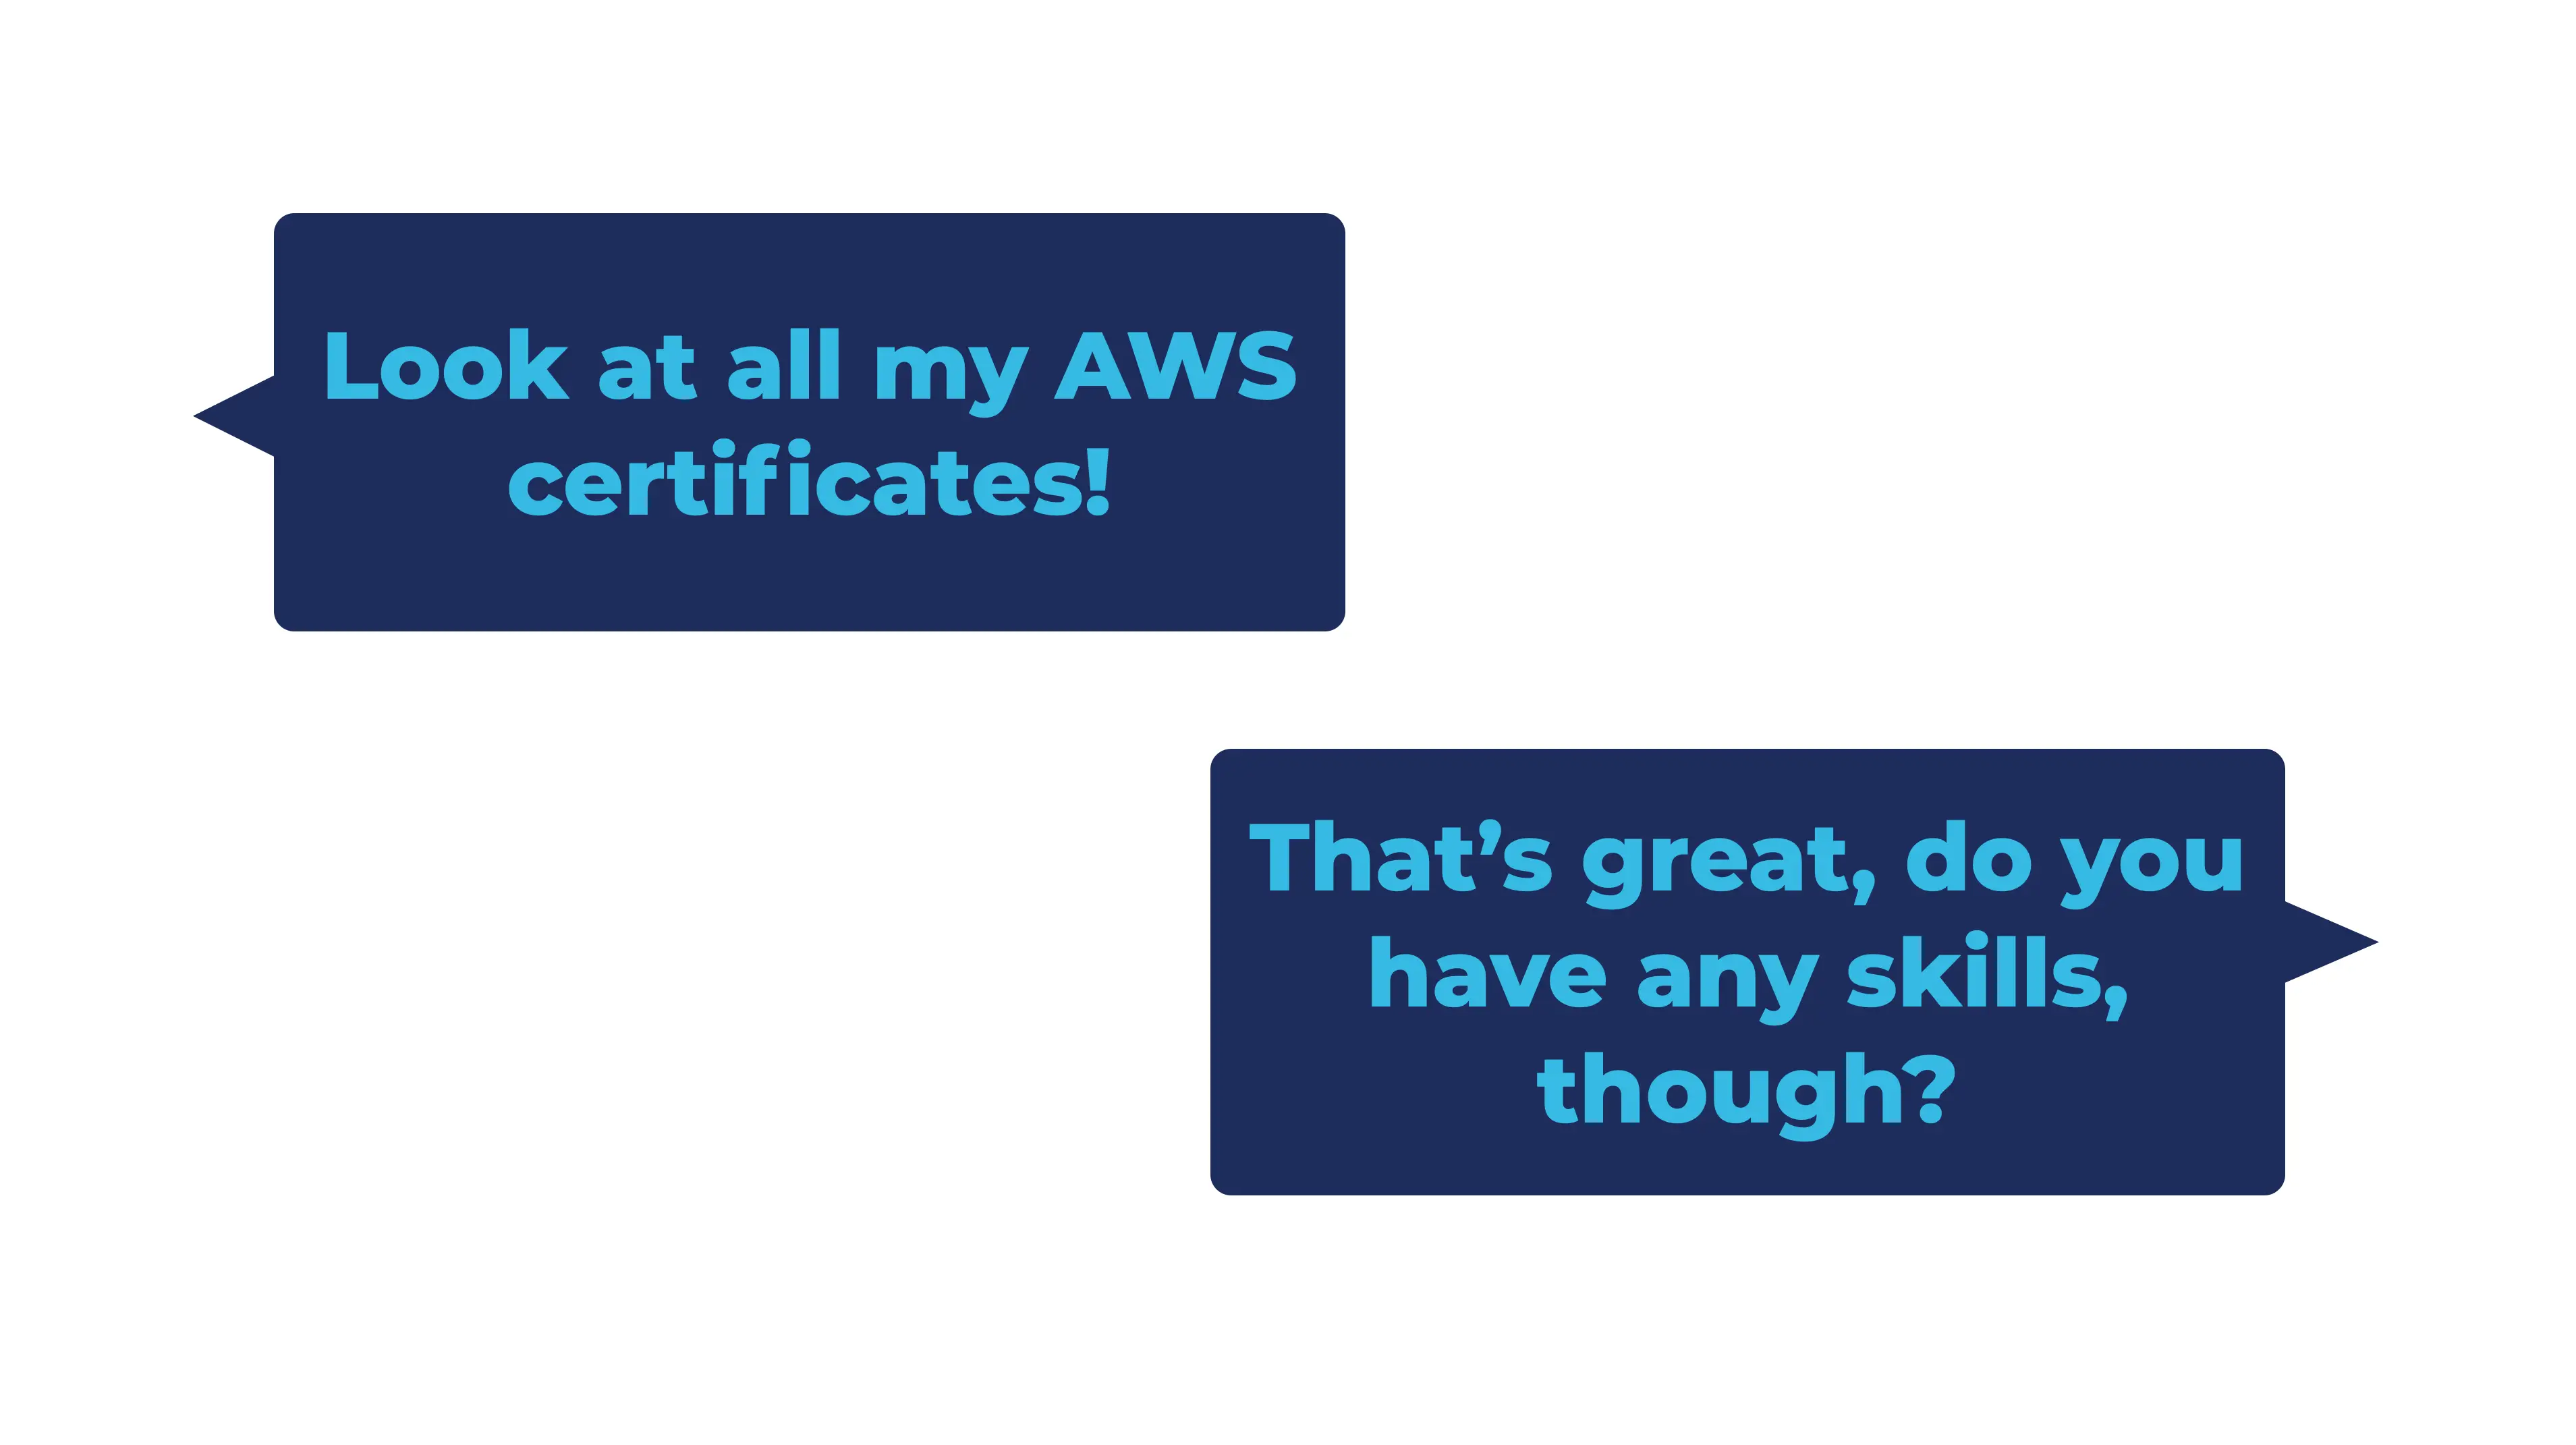 "Look at all my AWS certificates", "Great, do you have any skills, though?"